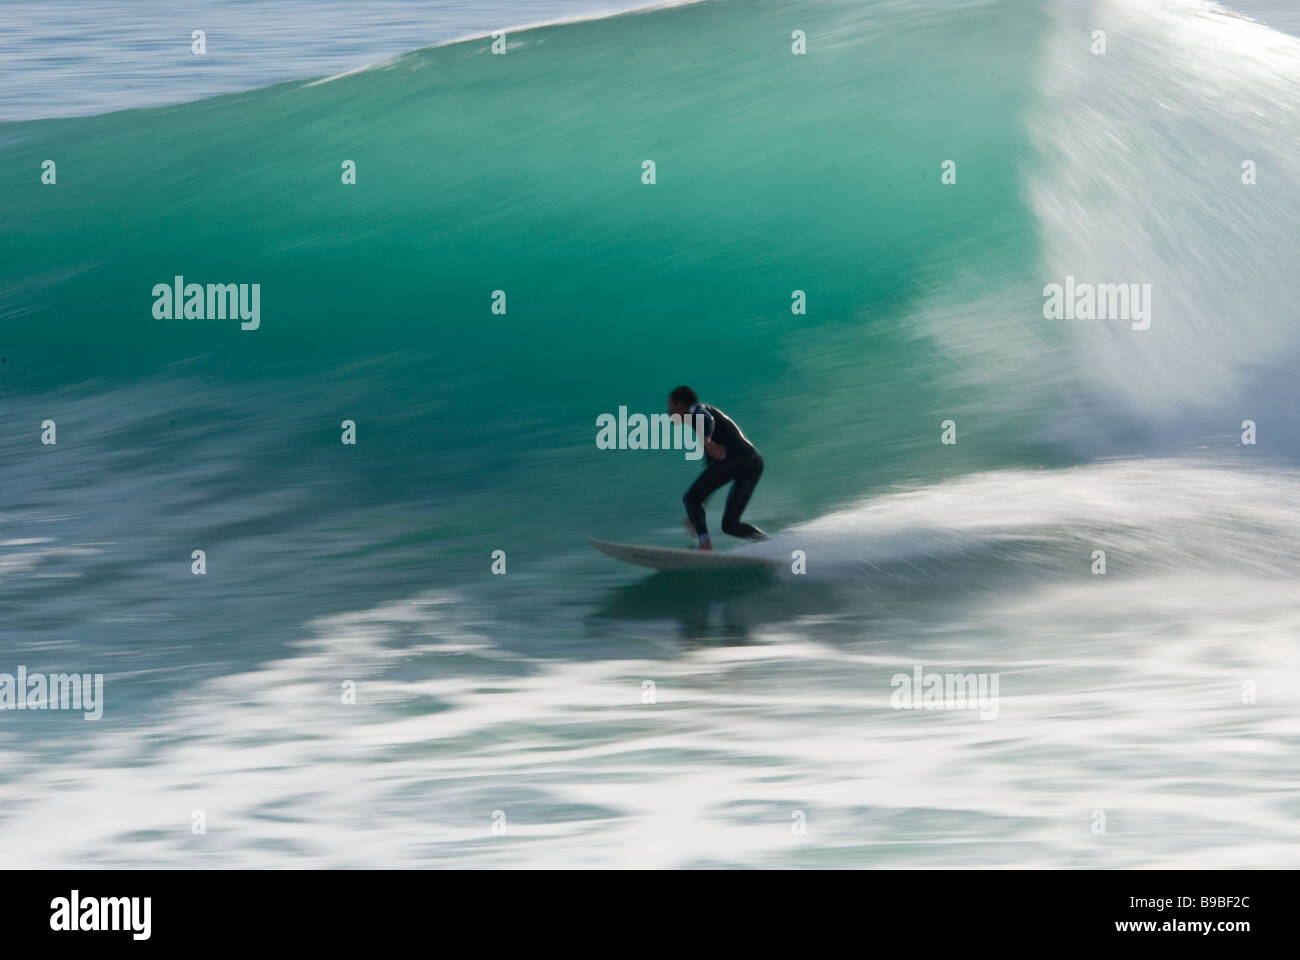 A surfer bottom turns on a wave known as Boilers on Cap Rihr  near Taghazoute, Morocco. Stock Photo